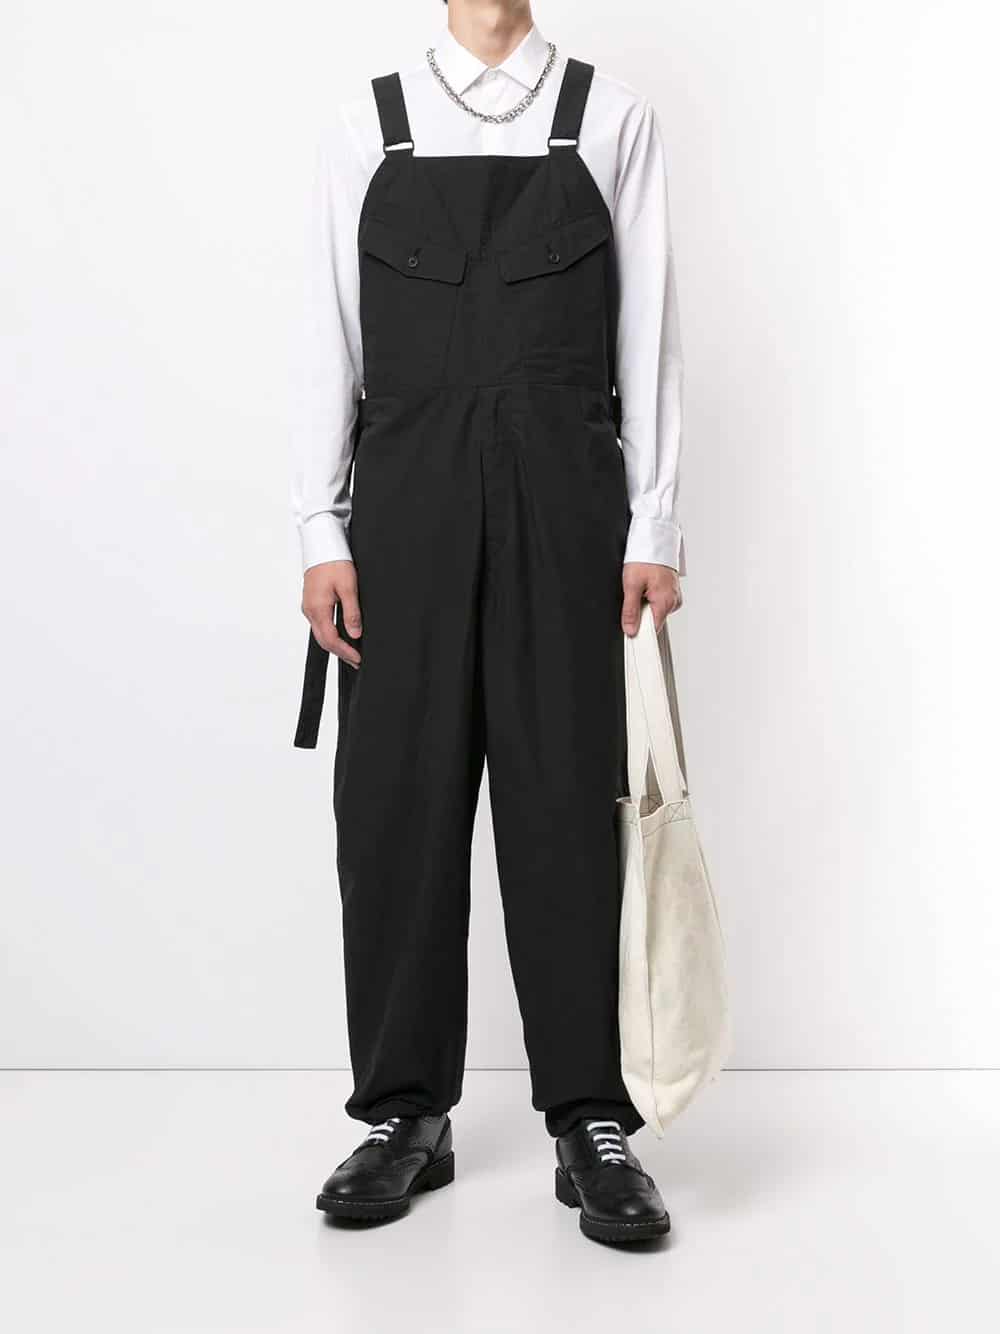 The 20 Best Jumpsuits for Men in 2023